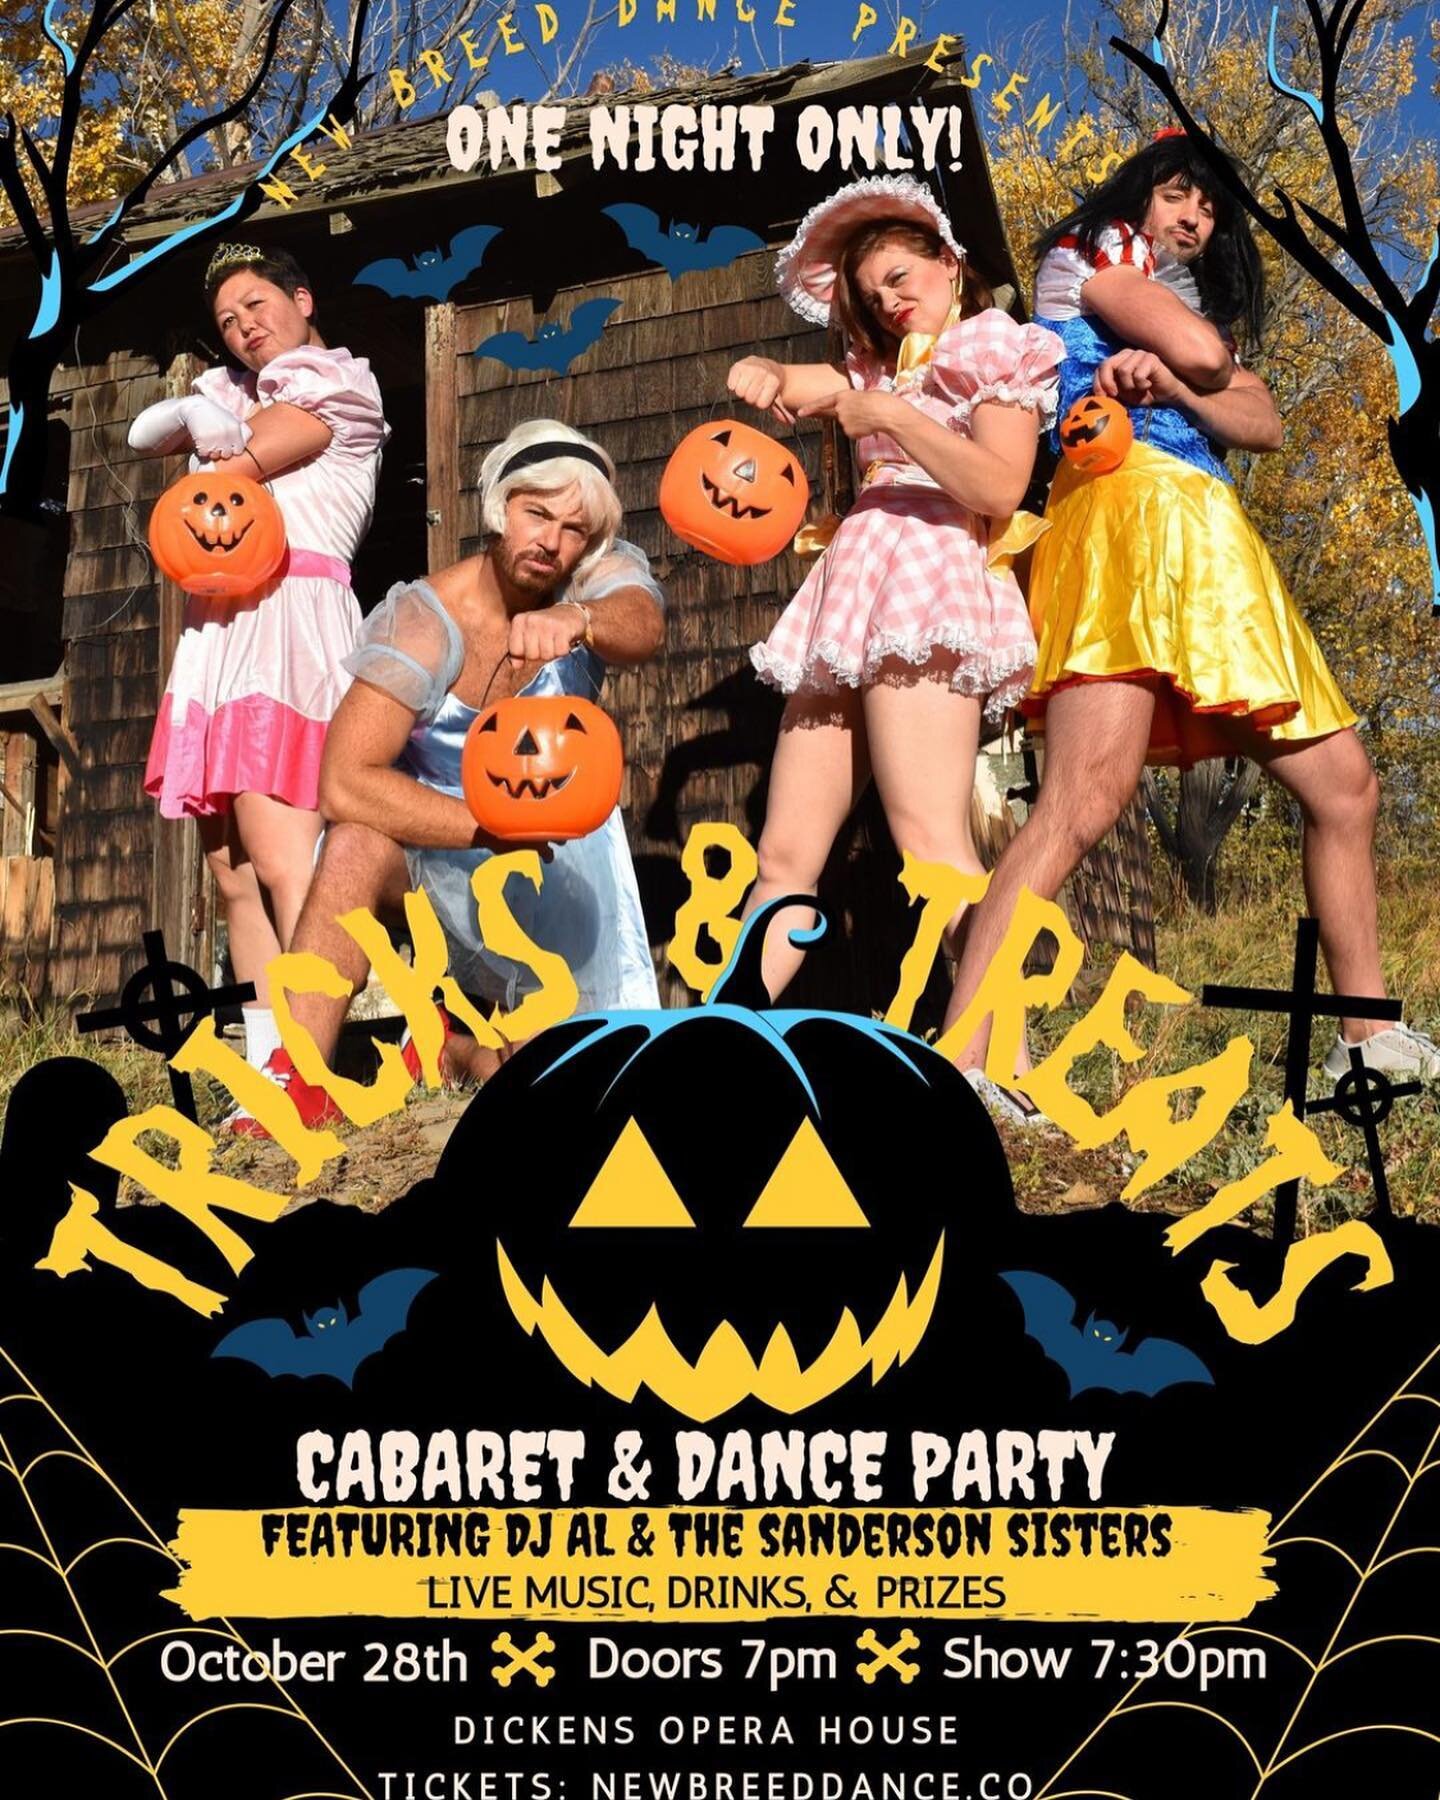 ALSO!!! ONE NIGHT ONlY!!!

Don't miss this unforgettable night, showcasing a wildly entertaining Halloween Cabaret, featuring The Sanderson Sisters Band and tons of exciting guest artists! The show will be followed by an epic Dance Party featuring th